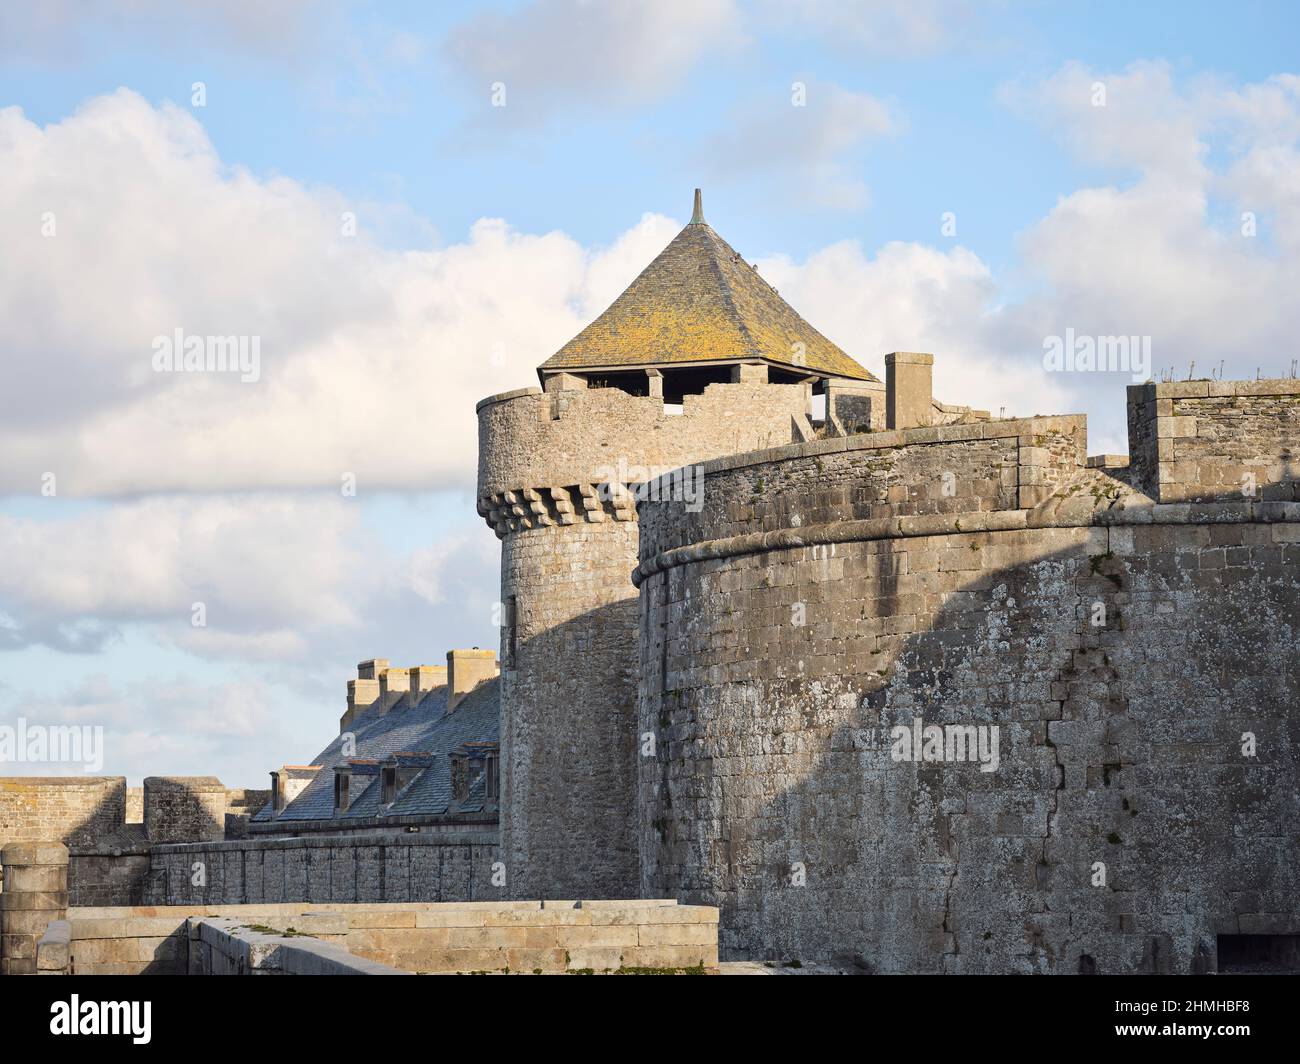 Defense tower in the fortress wall in Saint-Malo in the Ill-et-Vilaine department. The city's port is the most important on the north coast of Brittany. Stock Photo